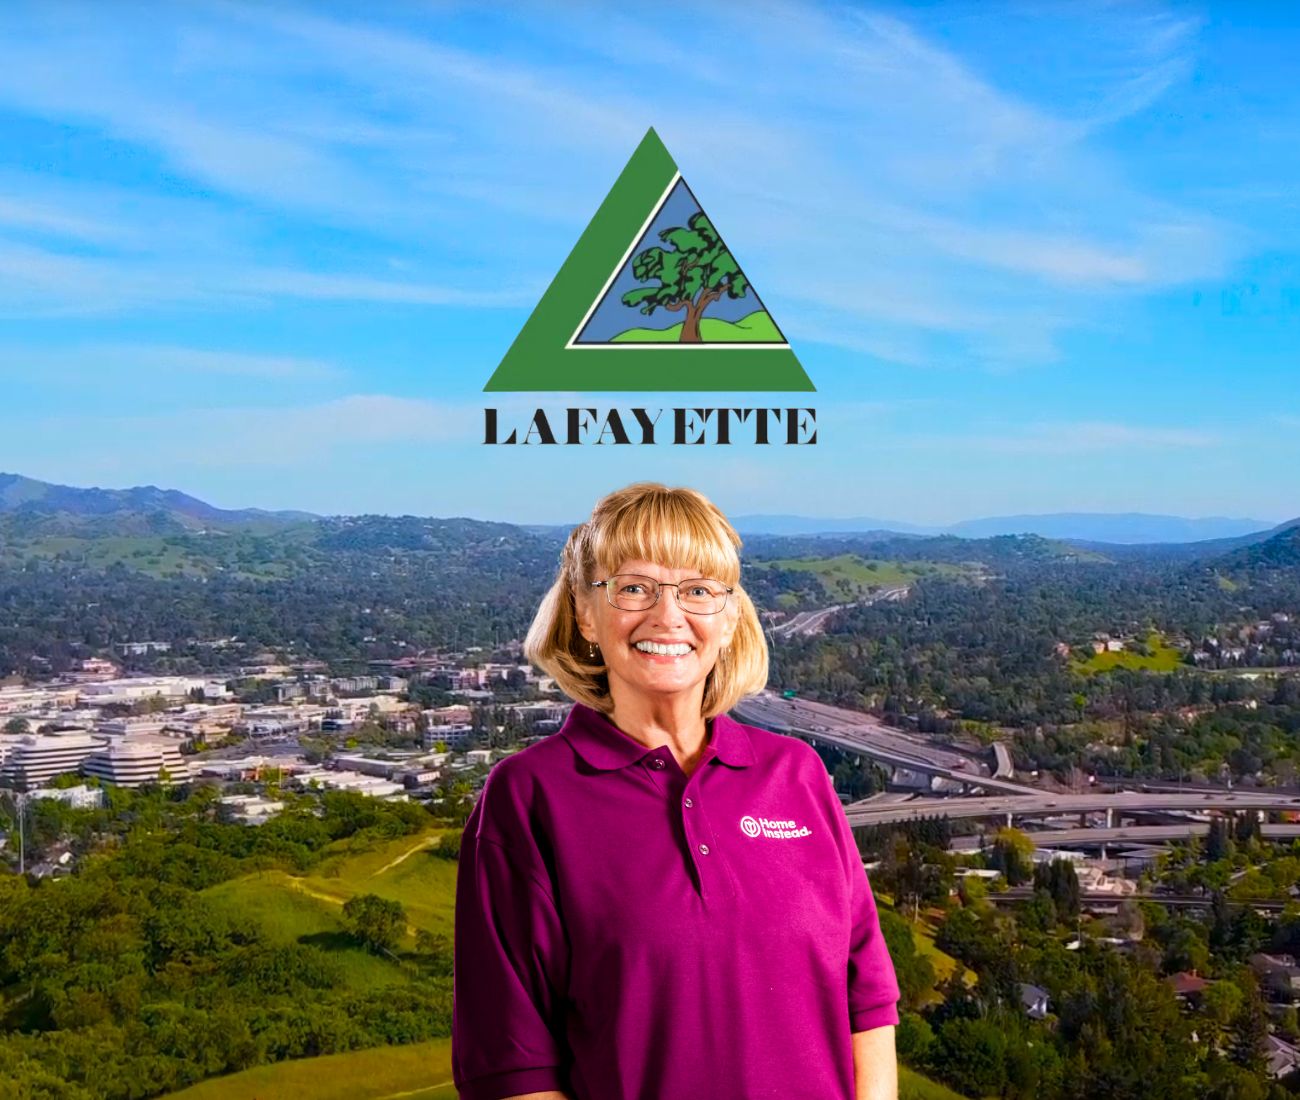 home instead caregiver with lafayette california in the background